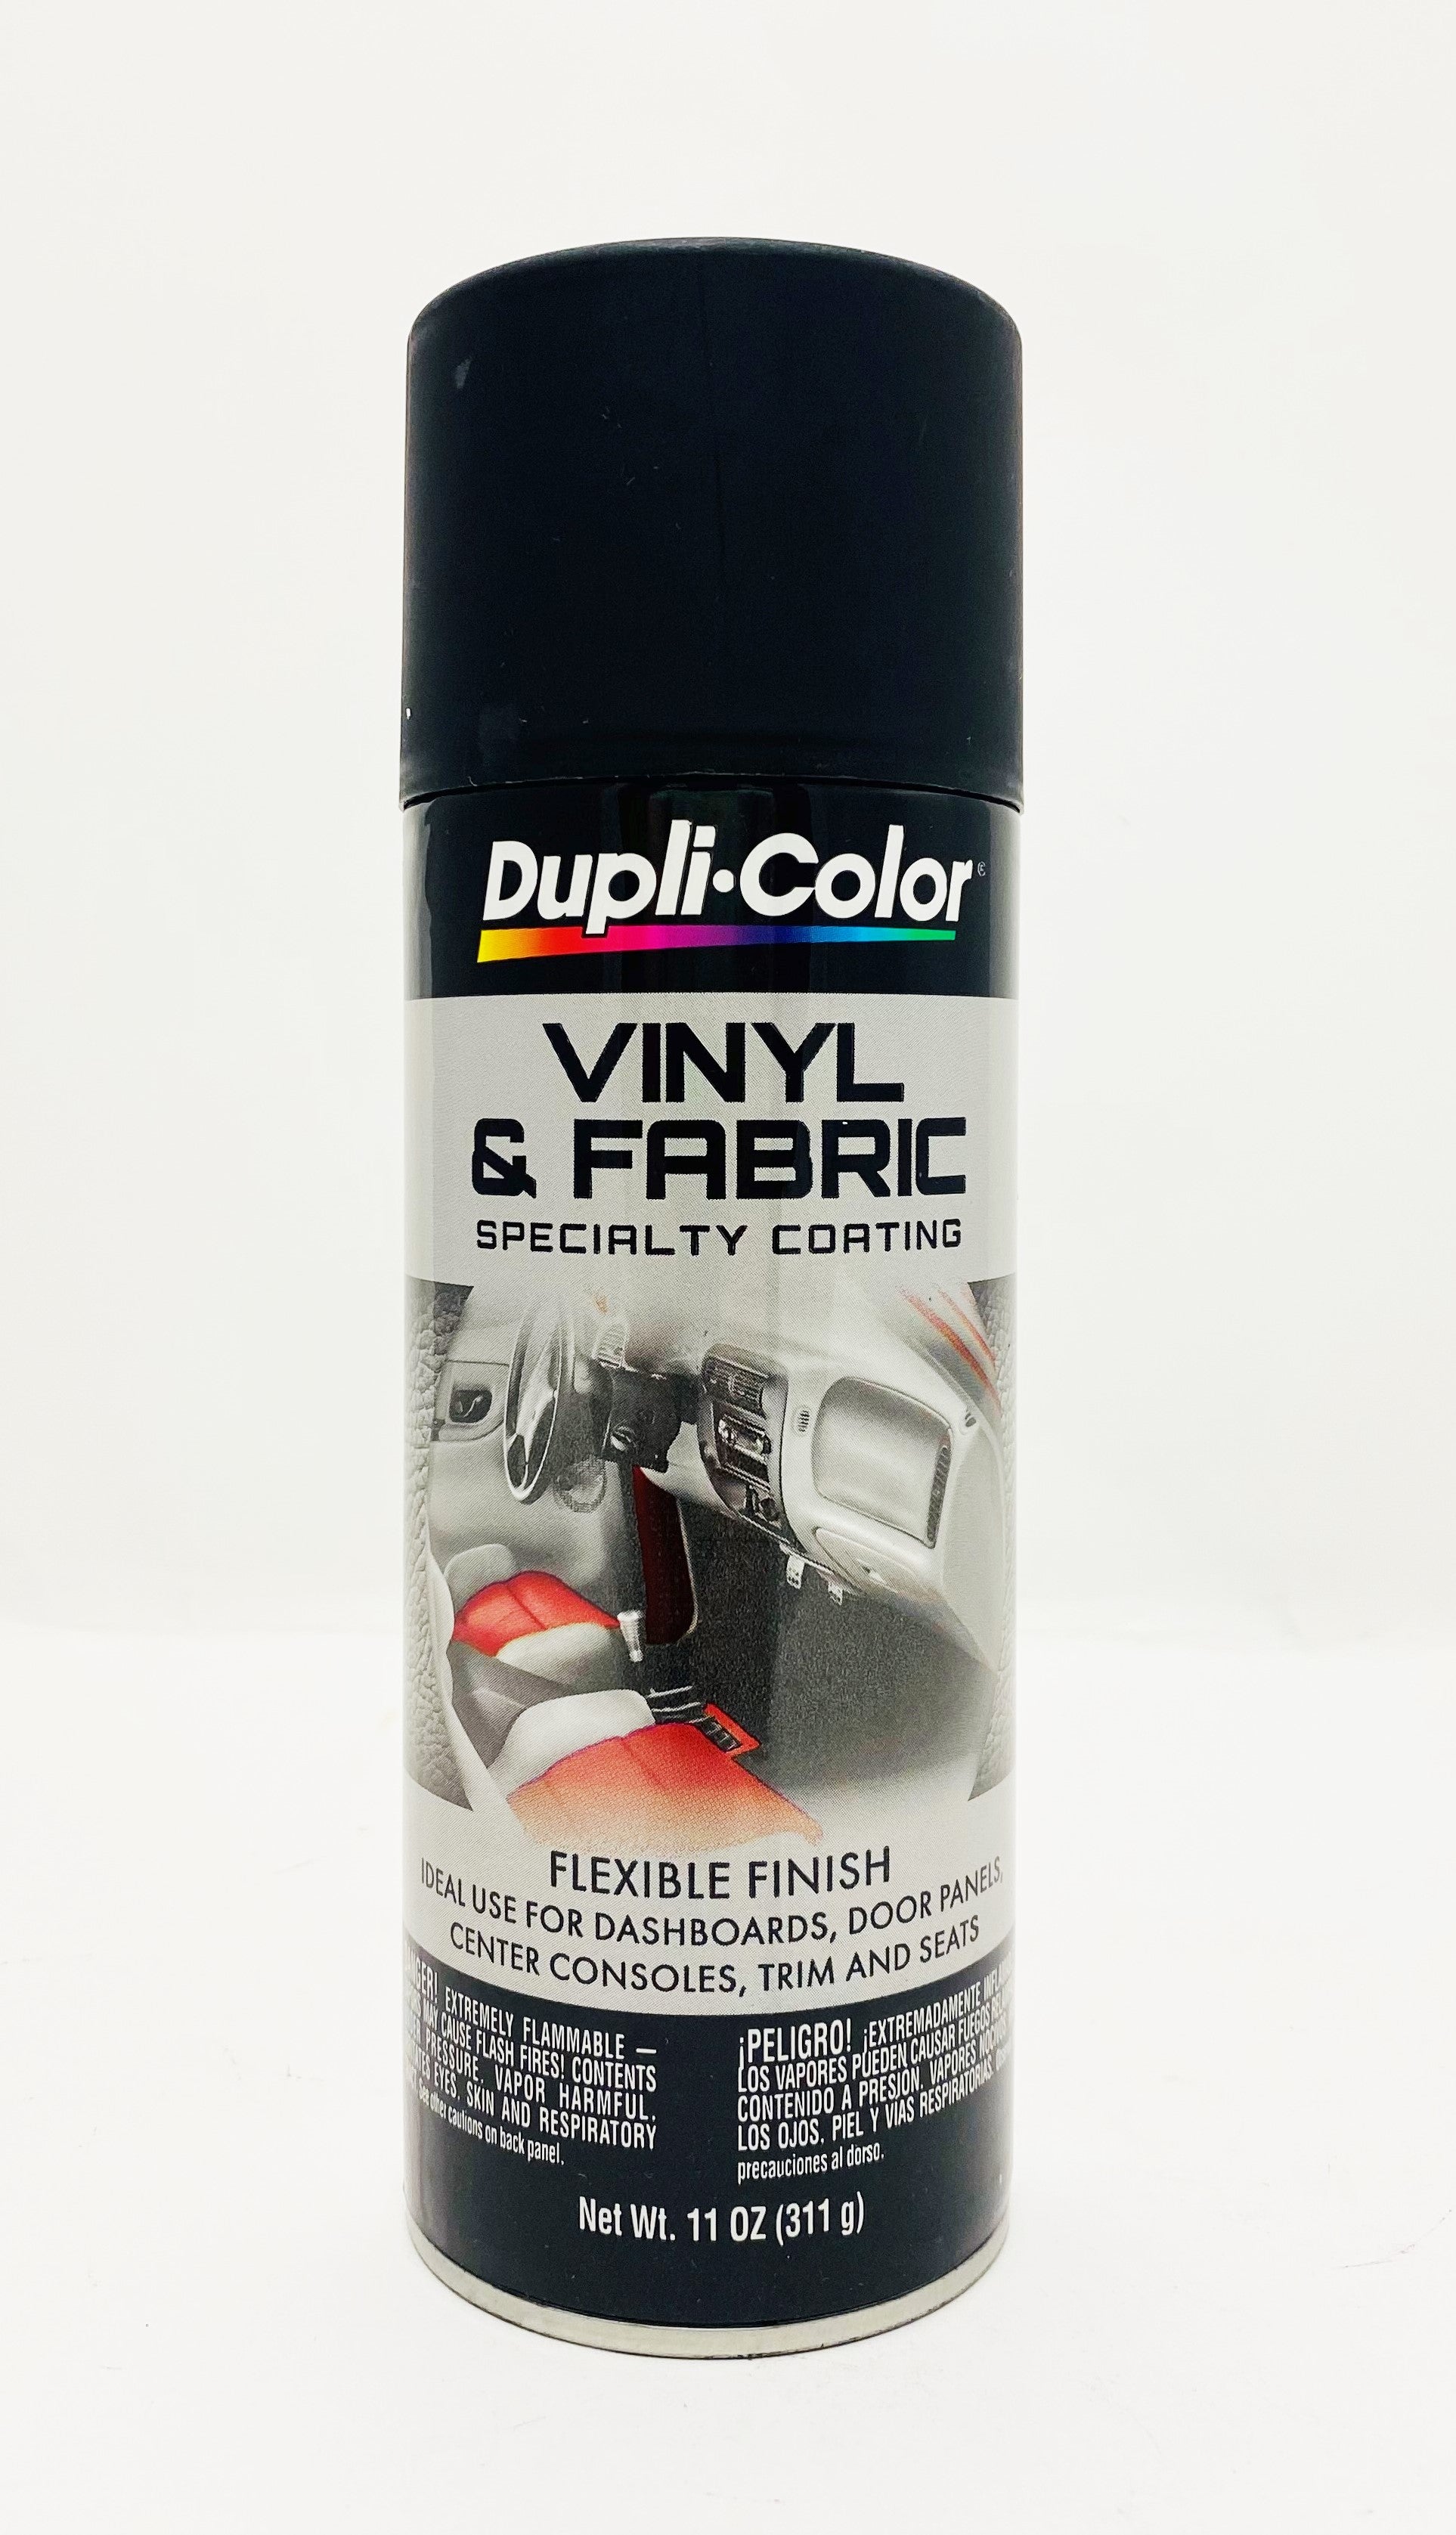 Black fabric paint • Compare & find best prices today »